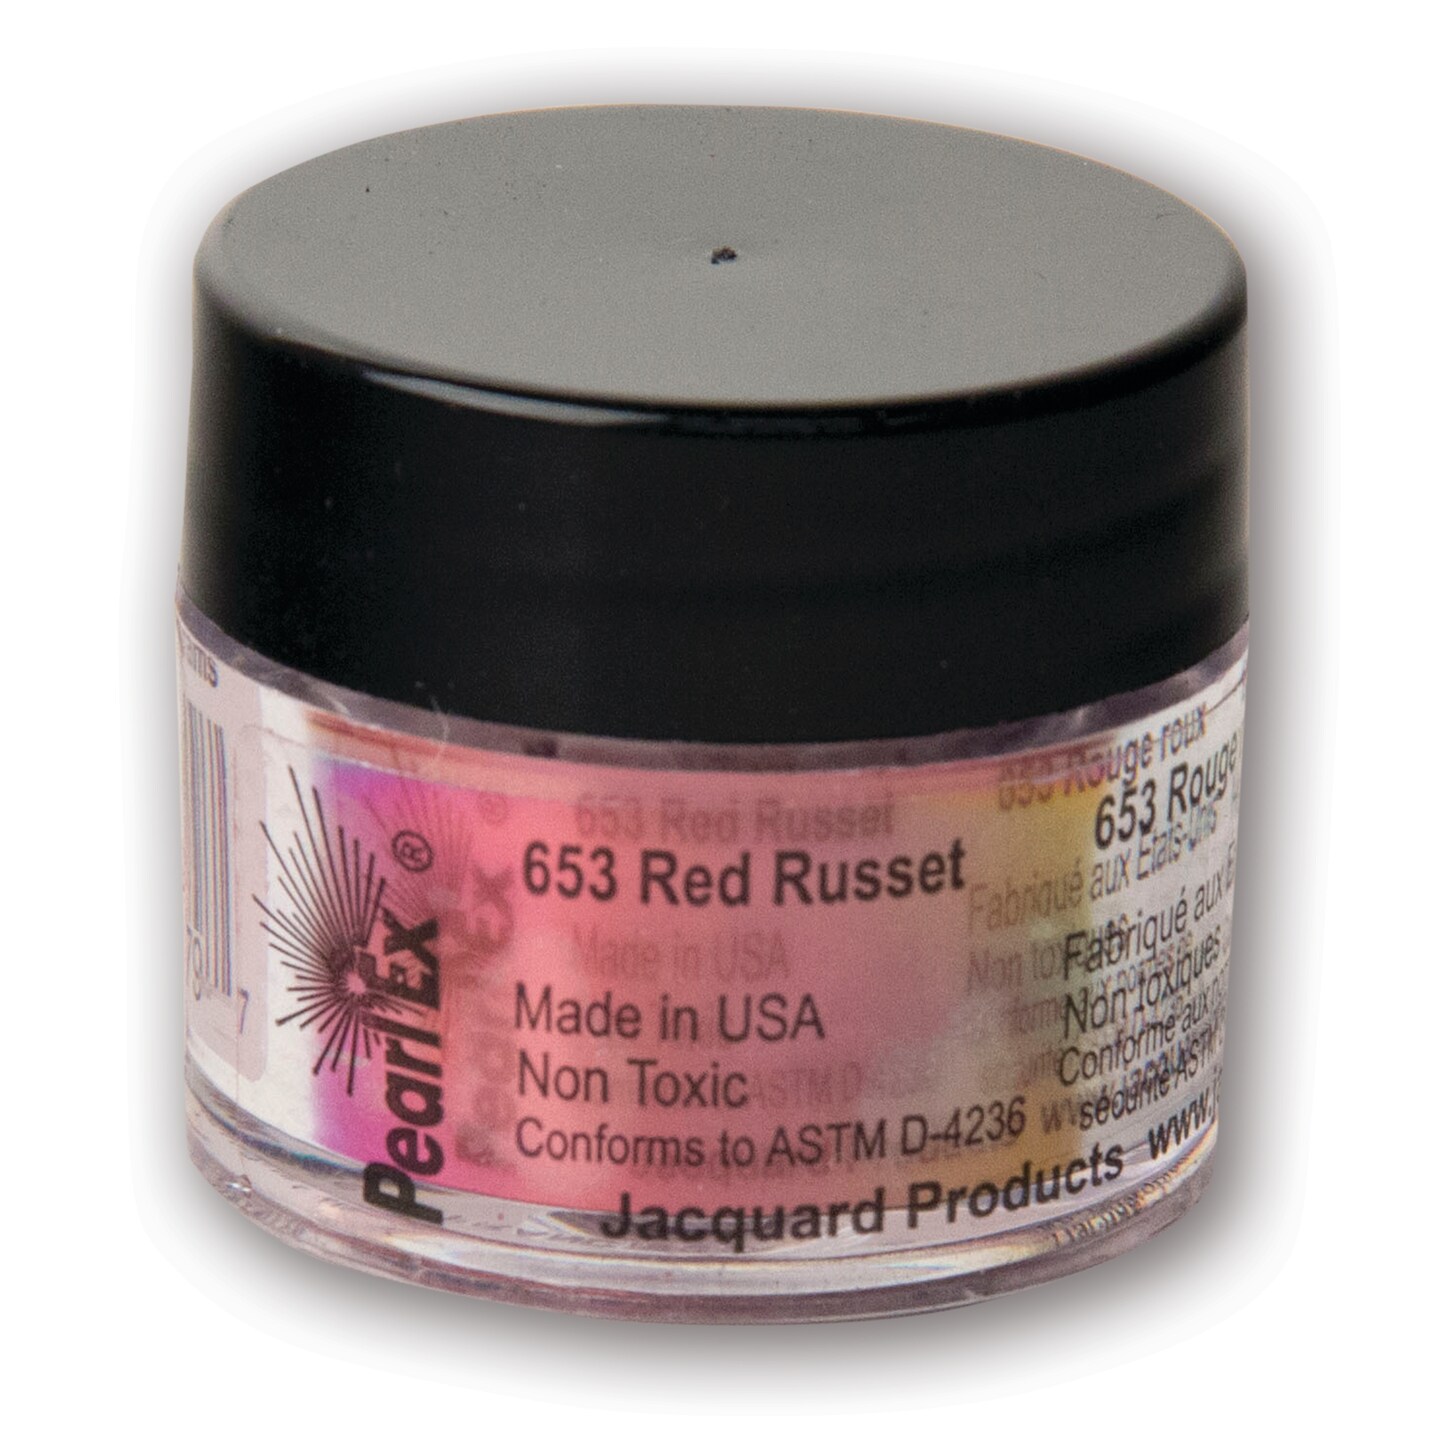 Jacquard Pearl Ex Pigment, 3g, Red Russet